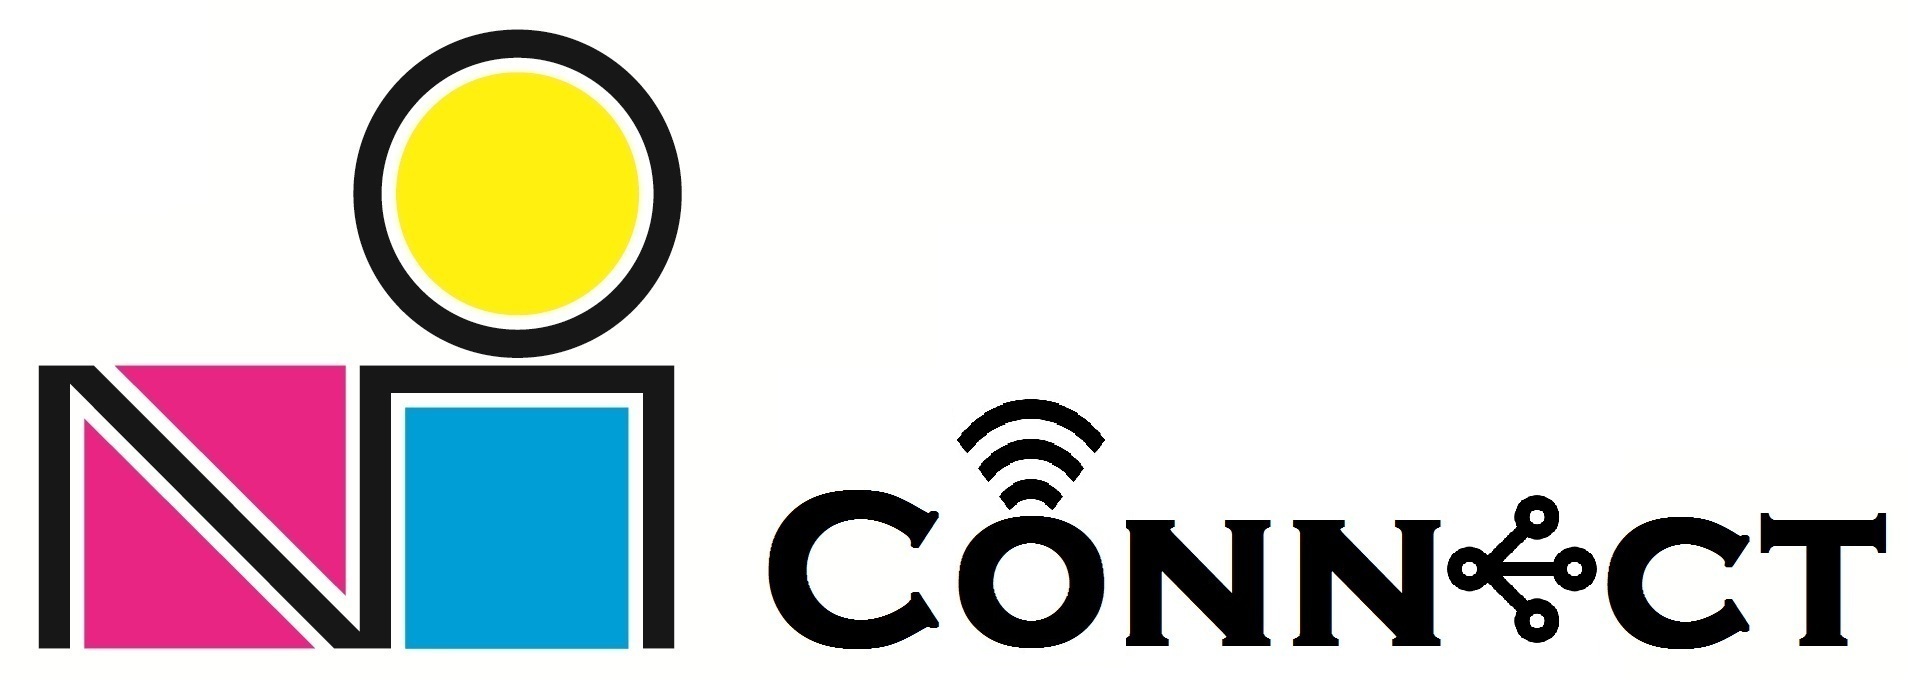 Ni Connect Banner Final Version 20190401 Test F Ver2